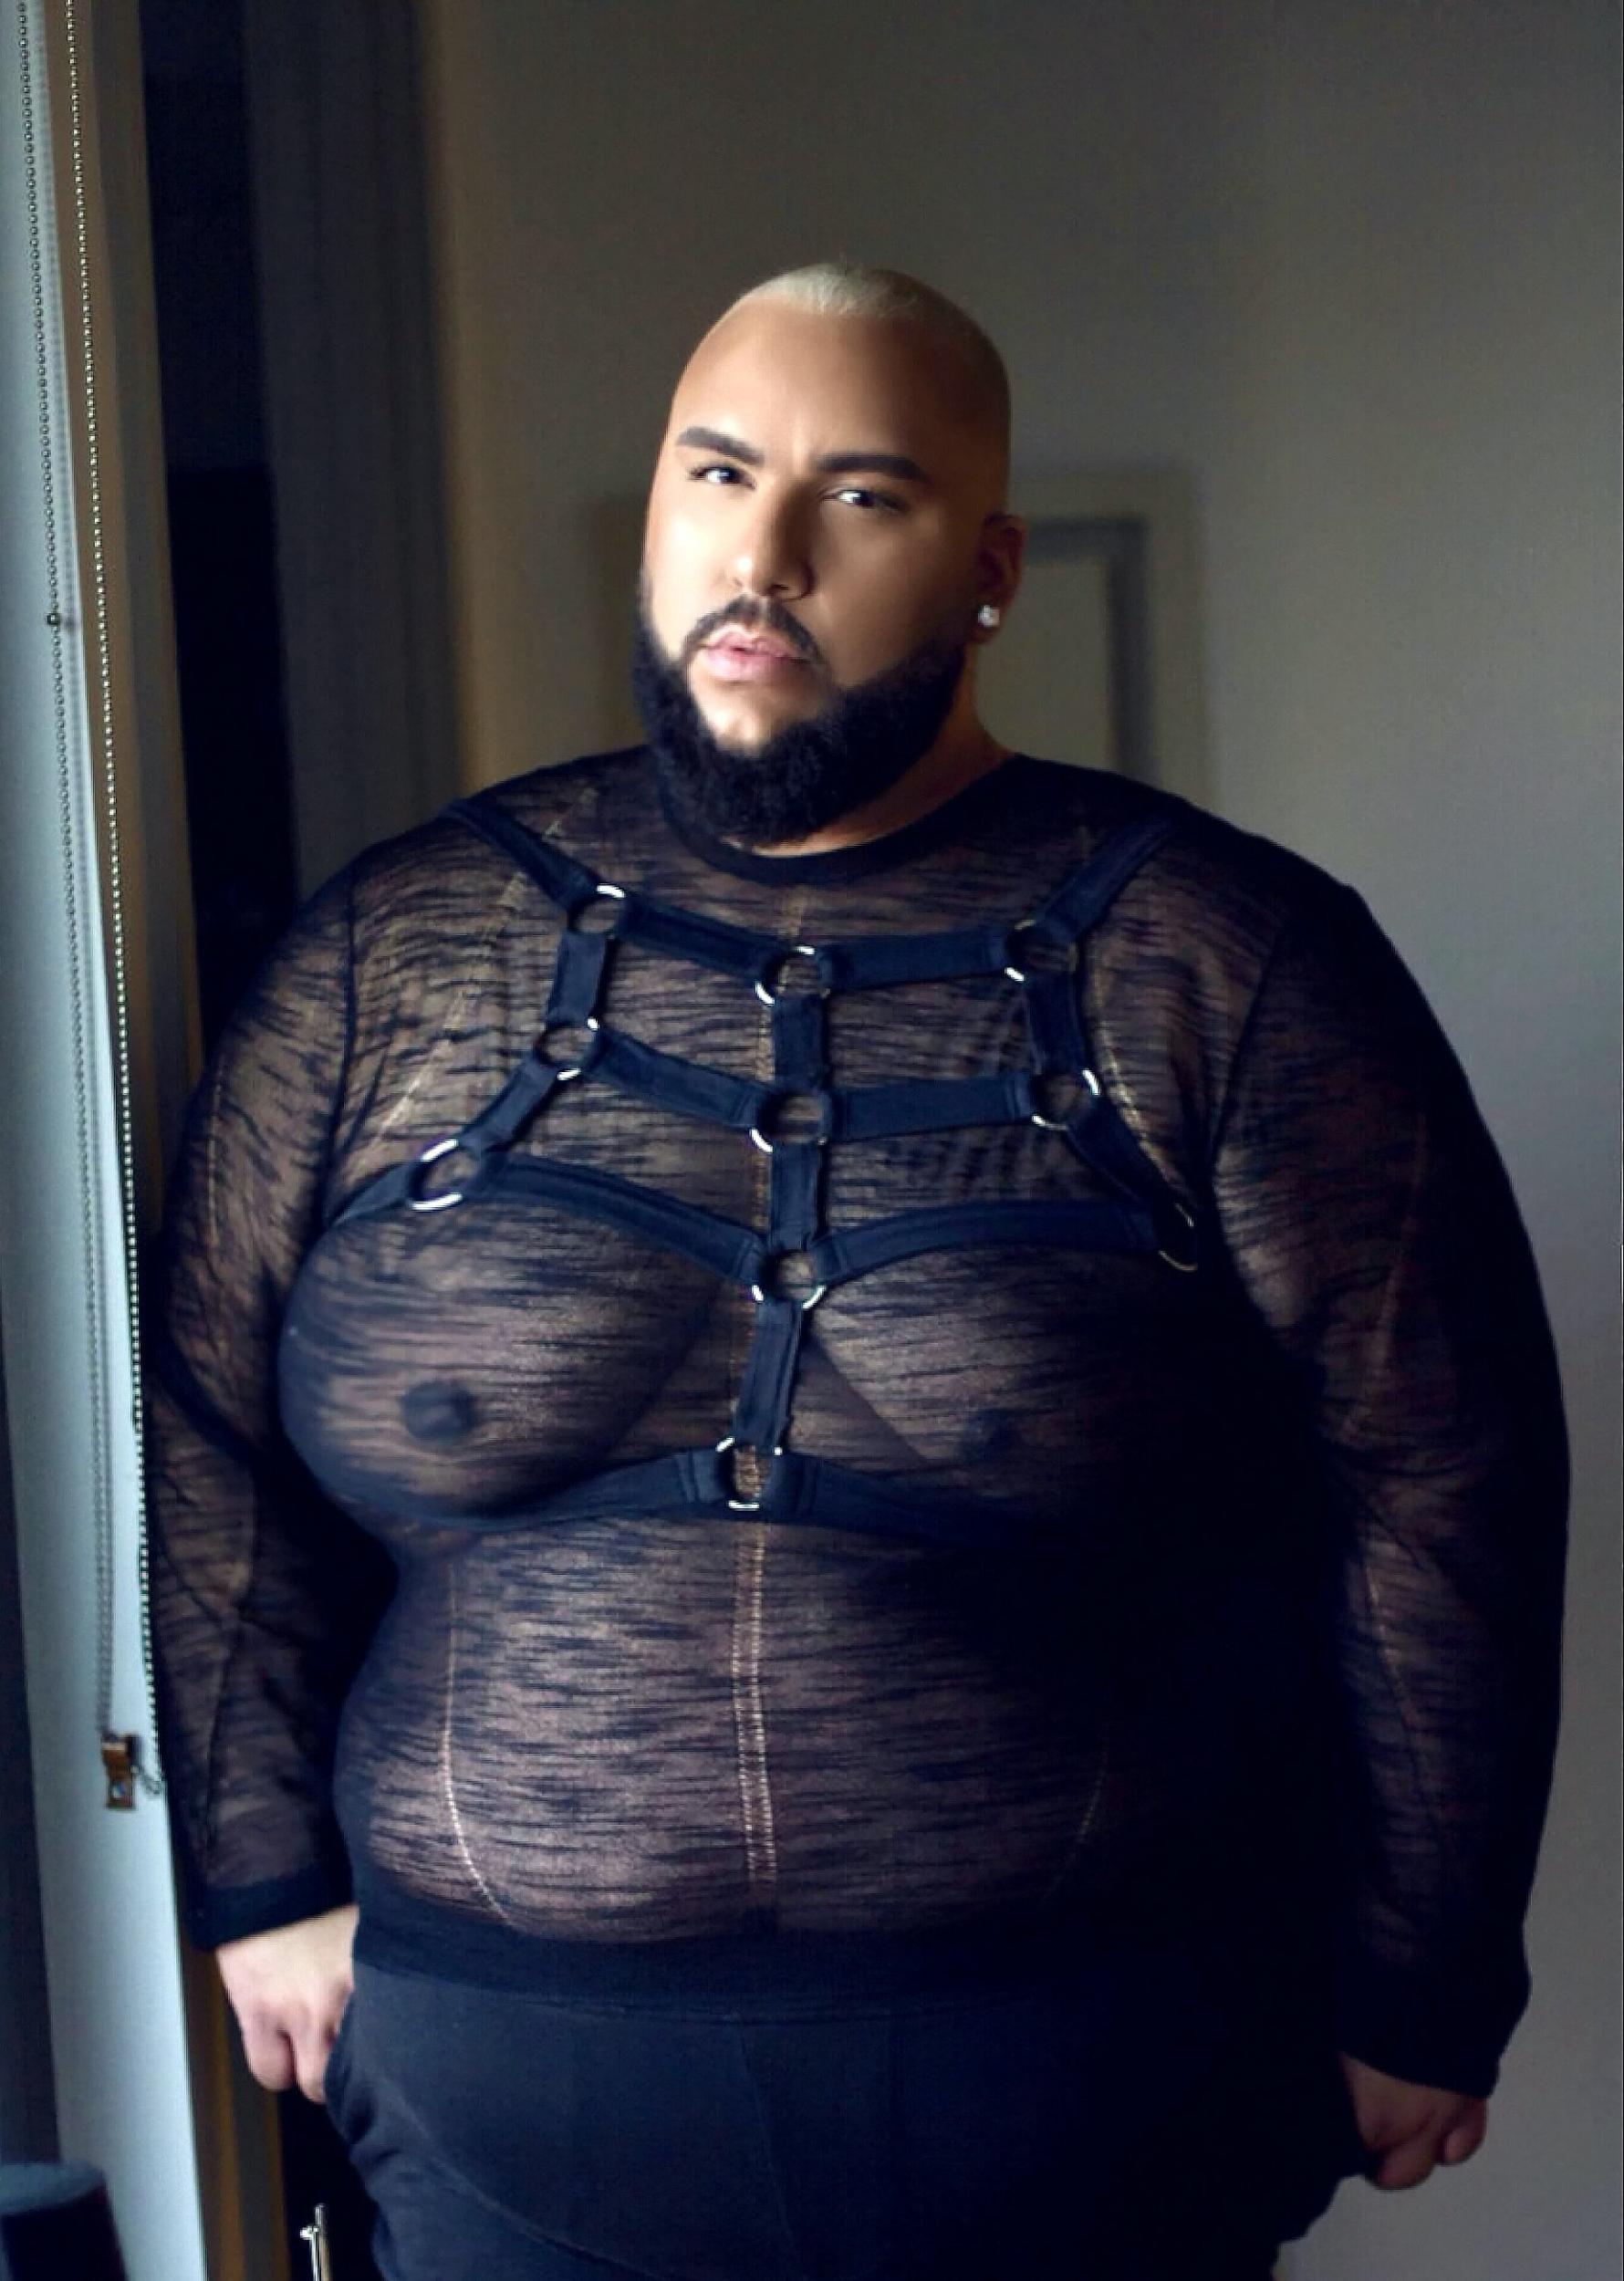 Plus-size male model breaks the norms and celebrates body